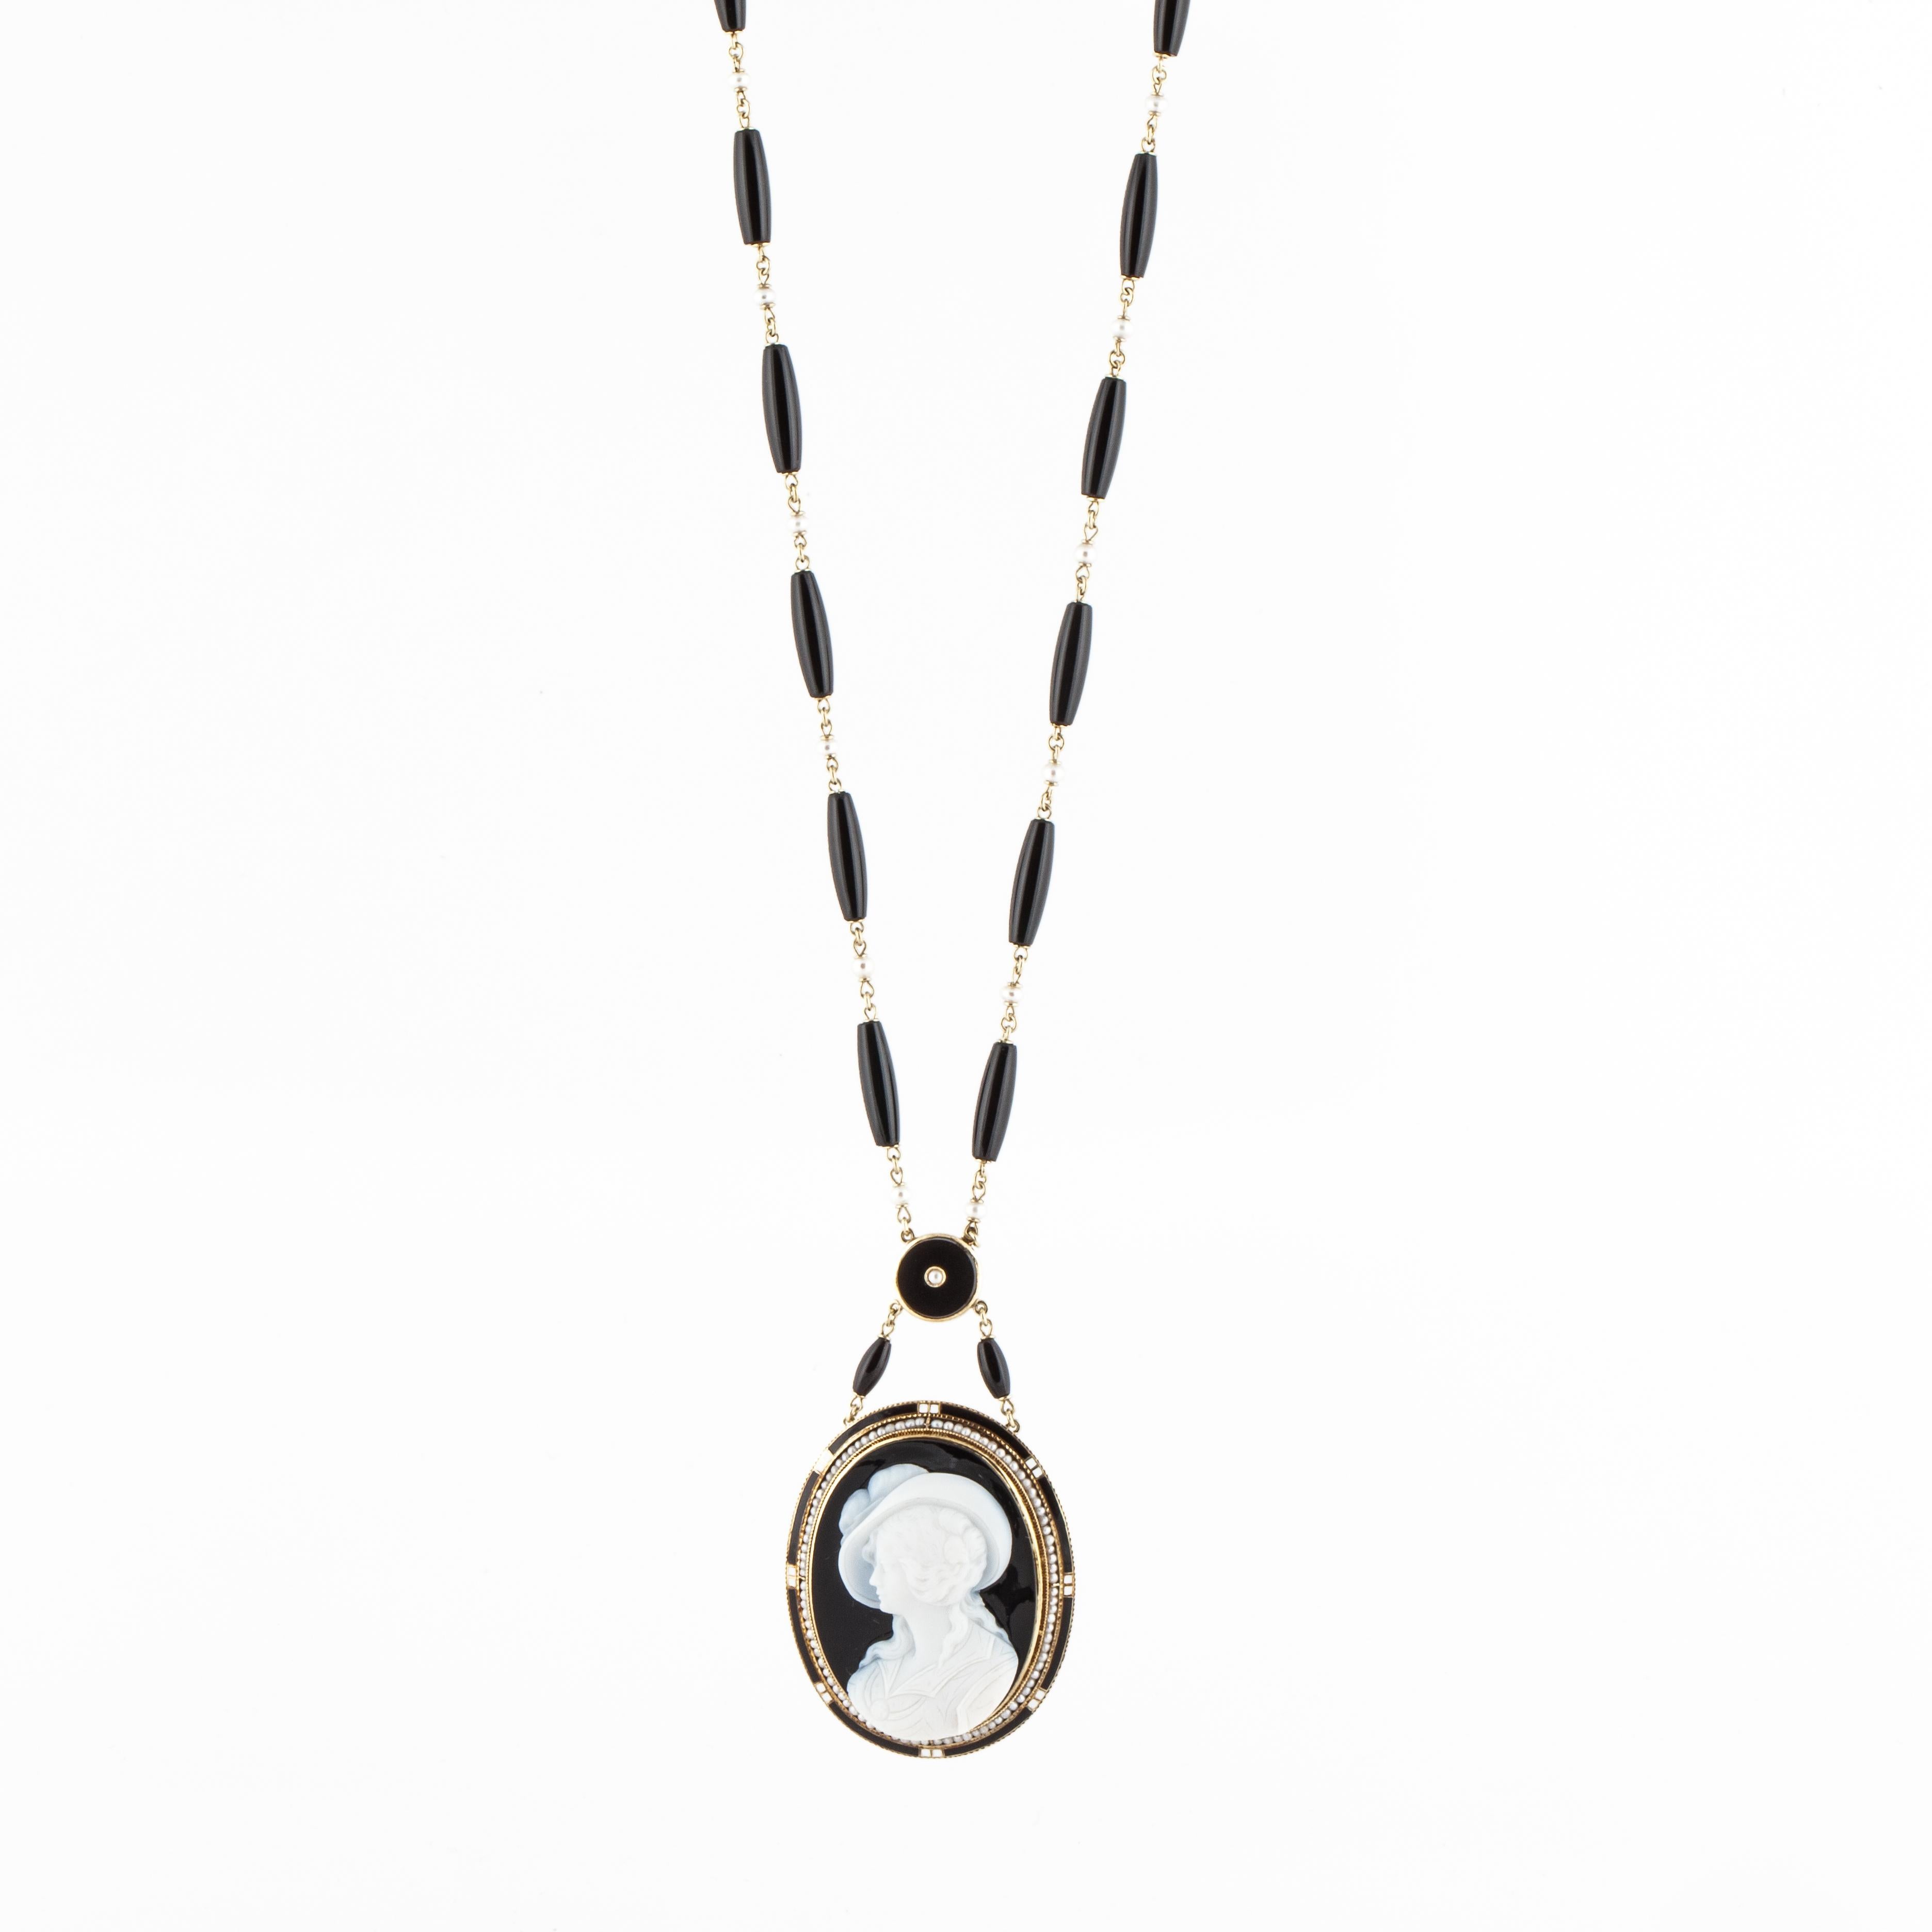 14K yellow gold hardstone cameo necklace with cultured pearls in the chain and seed pearls surrounding the cameo frame.  Chain is elongated onyx beads interspersed with pearls.  The cameo is a profile of a lady wearing a hat.  Necklace measures 24